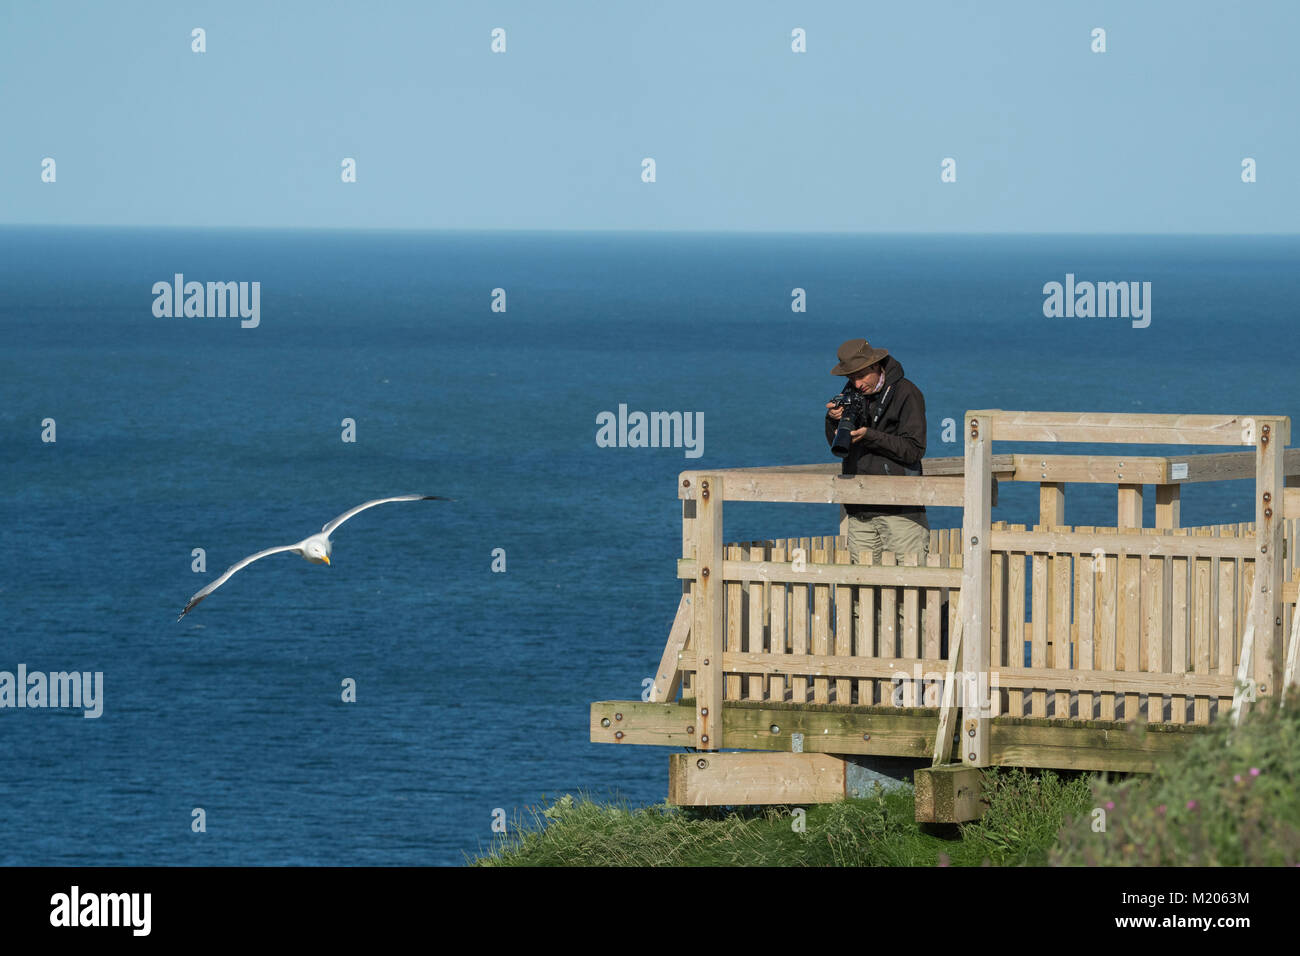 Man on viewing platform takes photo with camera as gull flies past over blue North Sea - Bempton Cliffs RSPB reserve, East Yorkshire, England, UK. Stock Photo